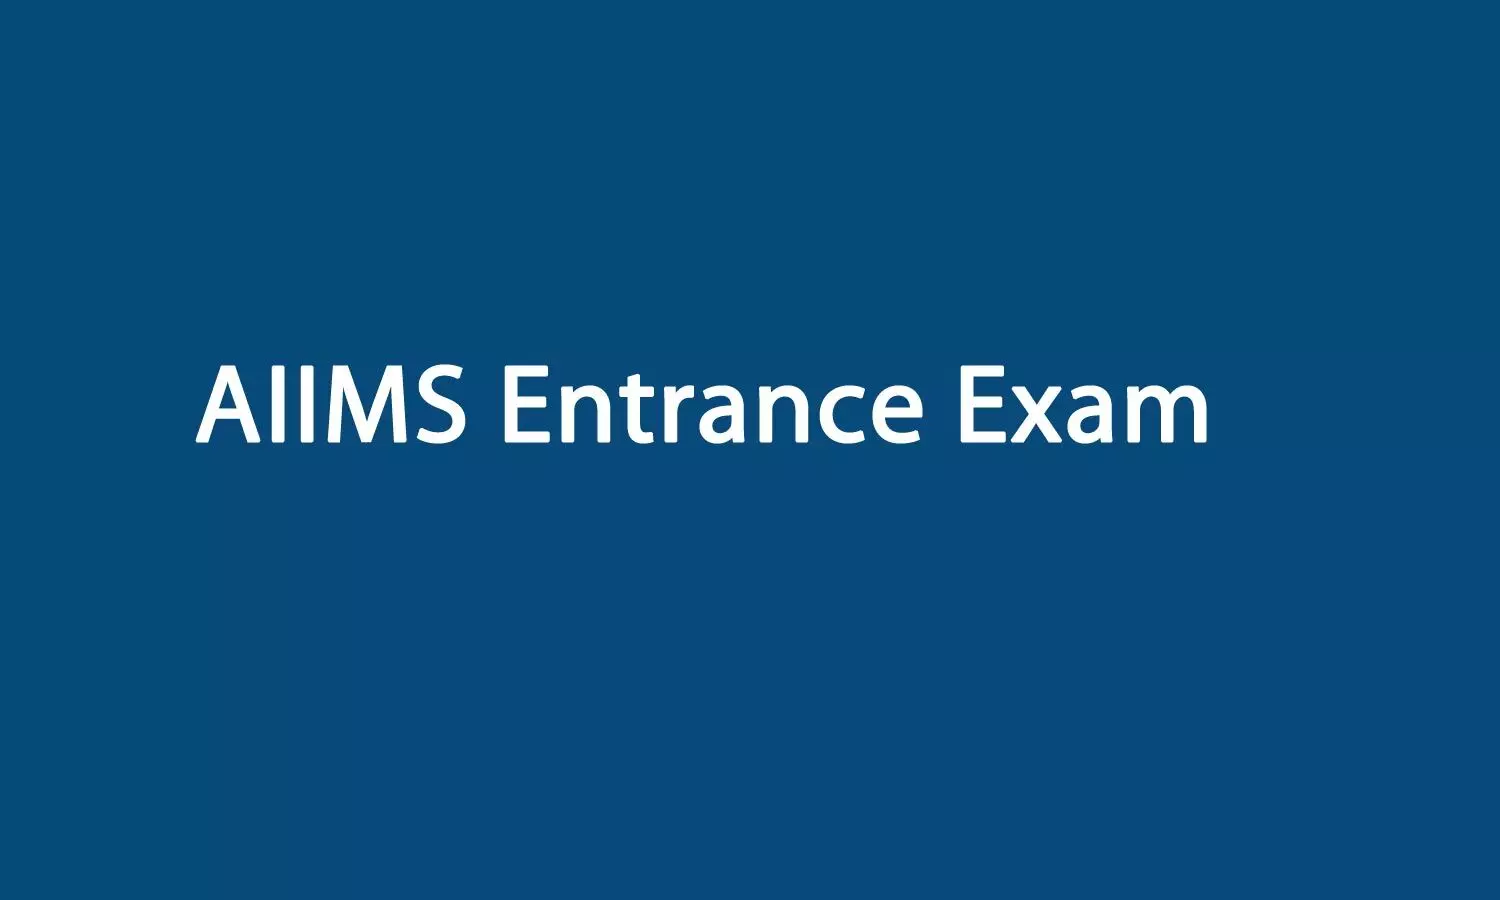 AIIMS releases schedule for Fellowship Programme January 2021 Entrance Exam